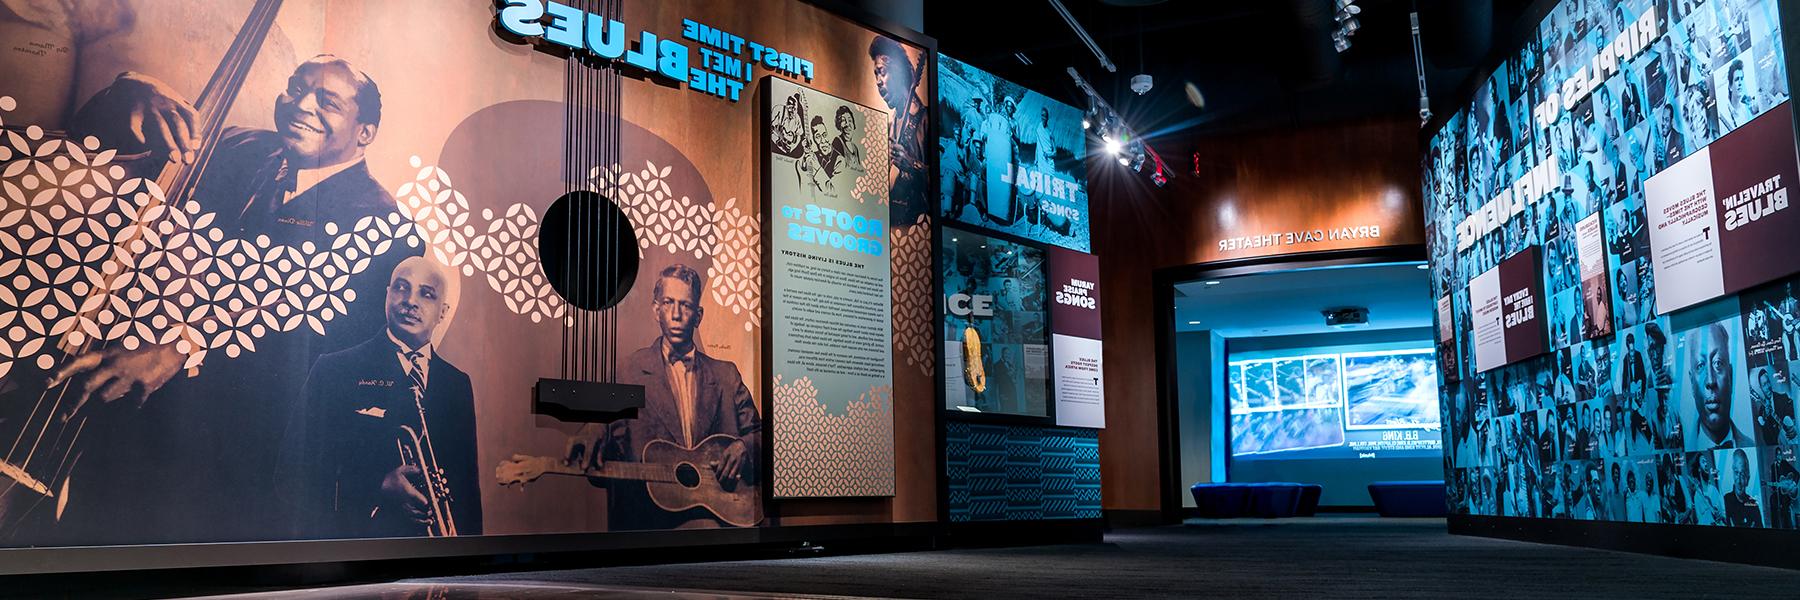 The National Blues Museum in St. Louis, Missouri, part of America's Music Corridor.